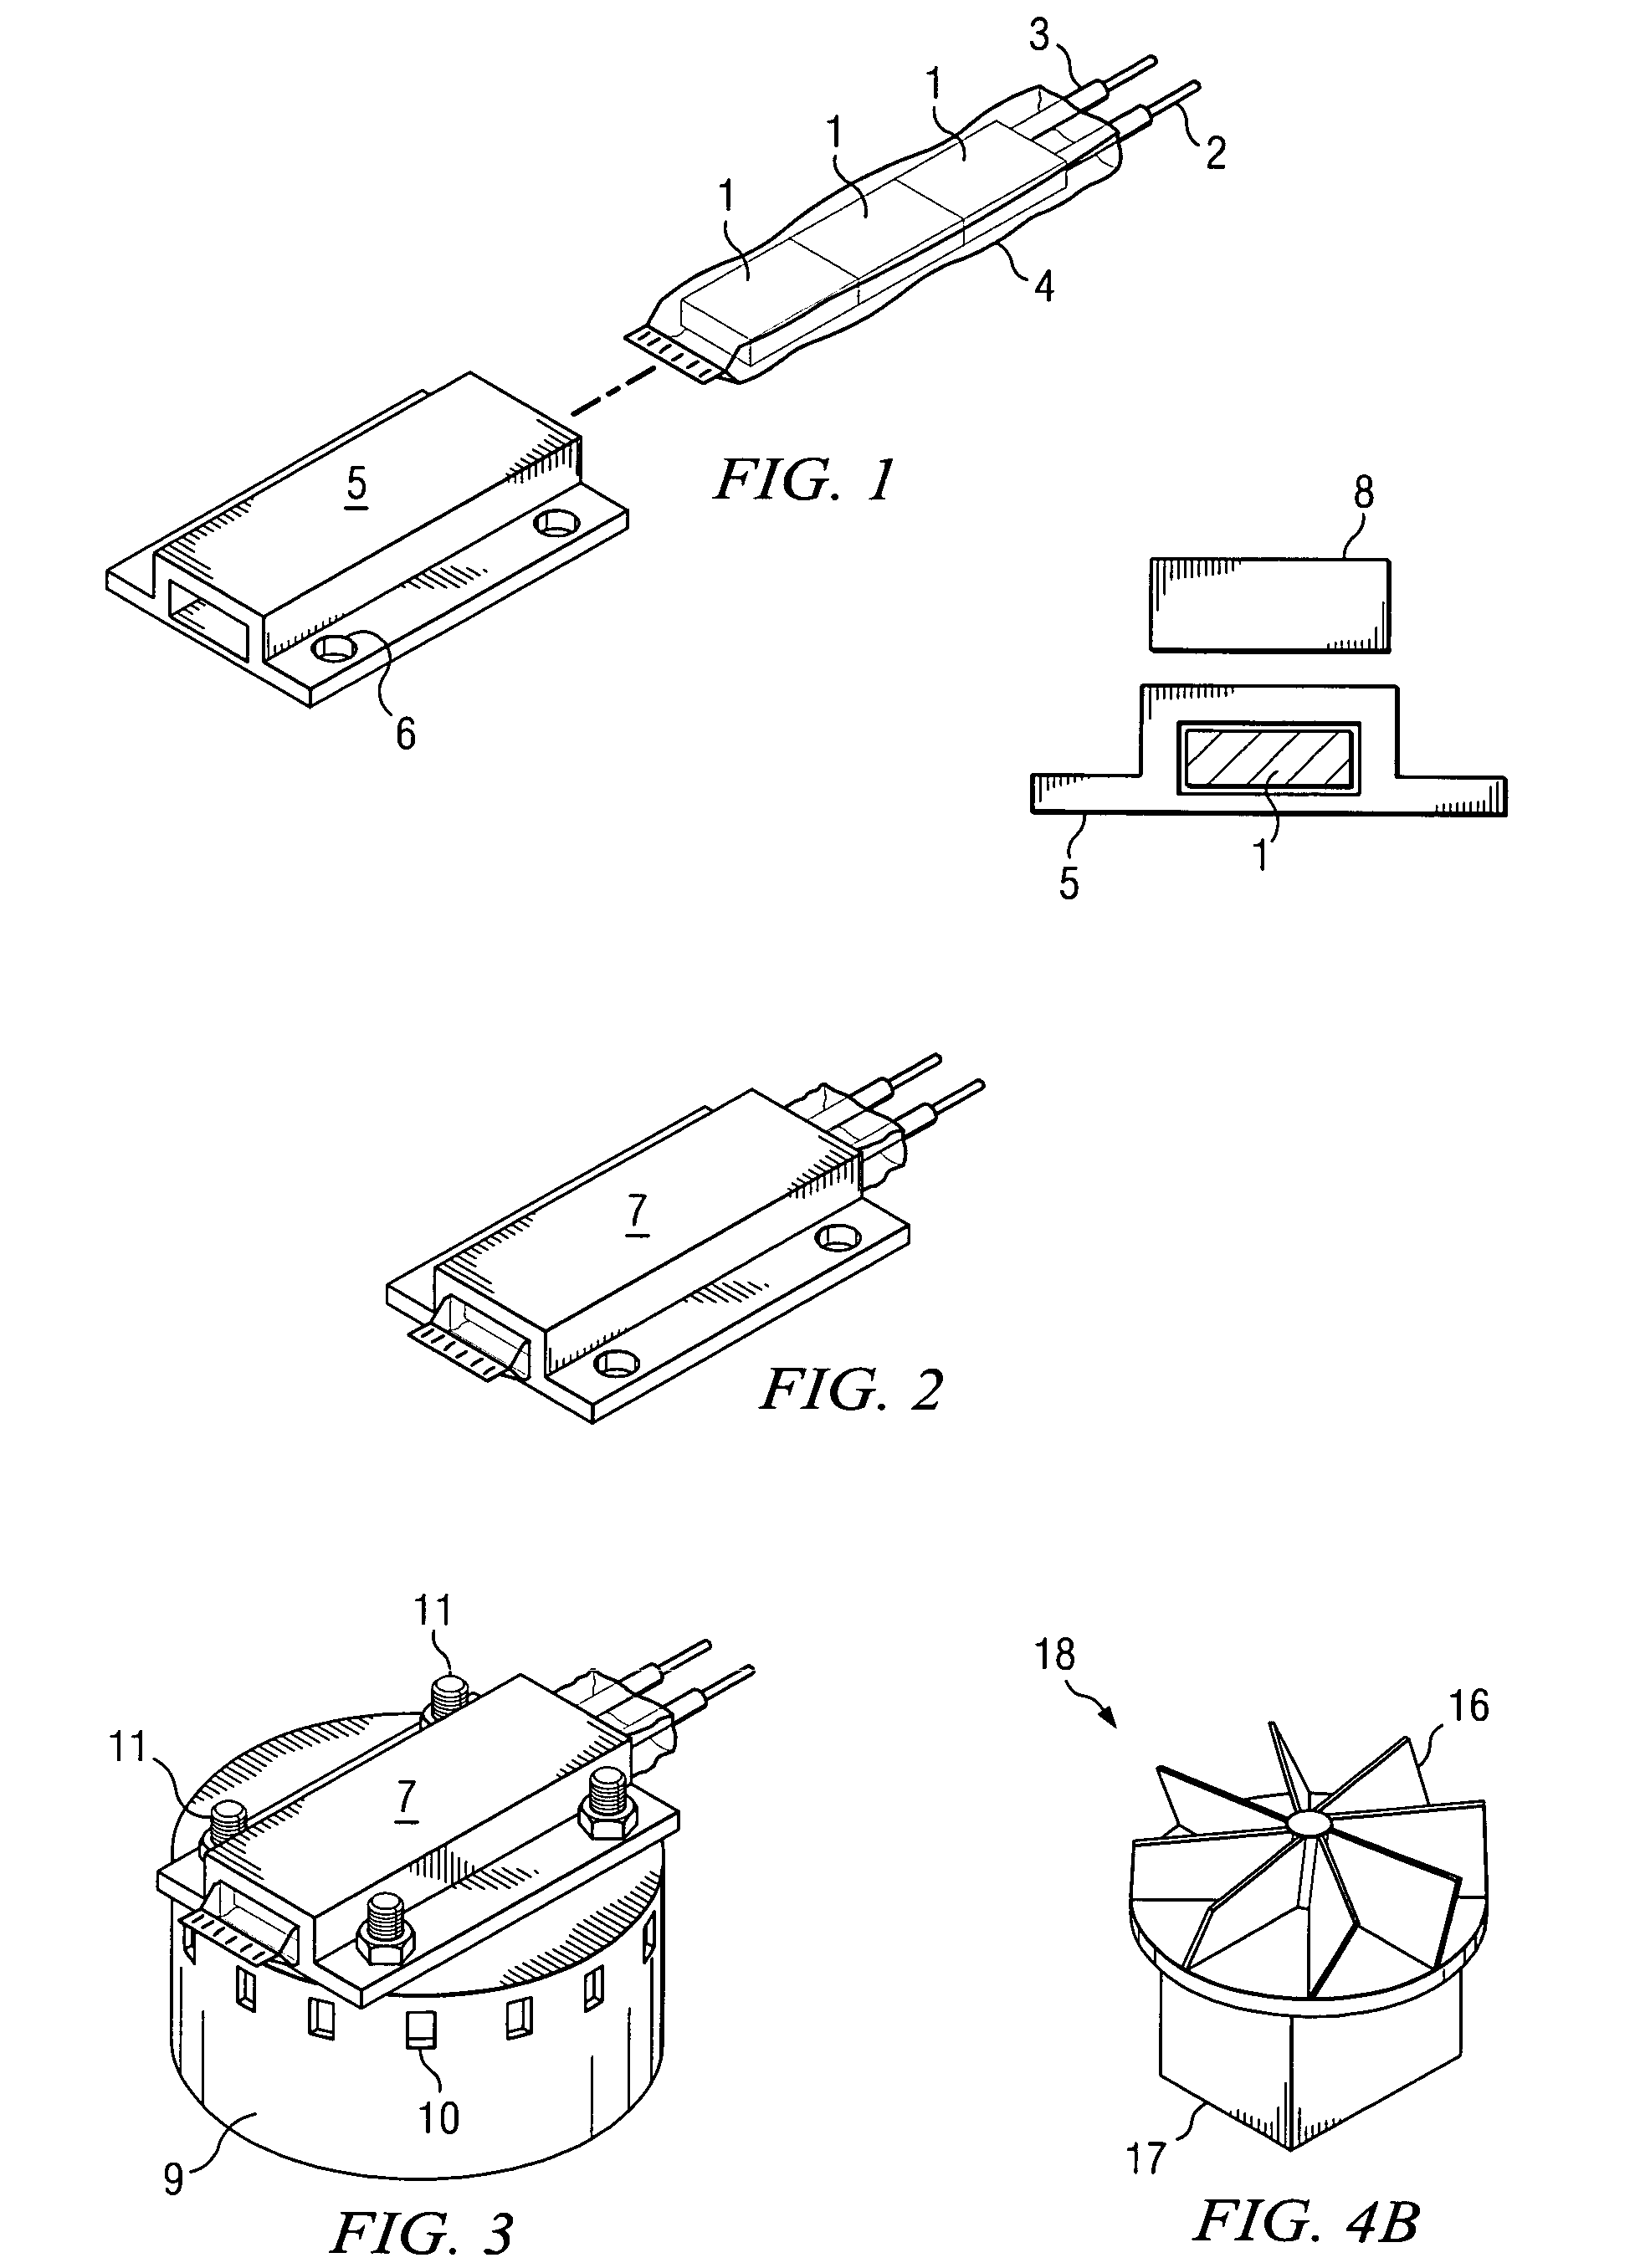 System and method for making popcorn using a self-regulating heating system